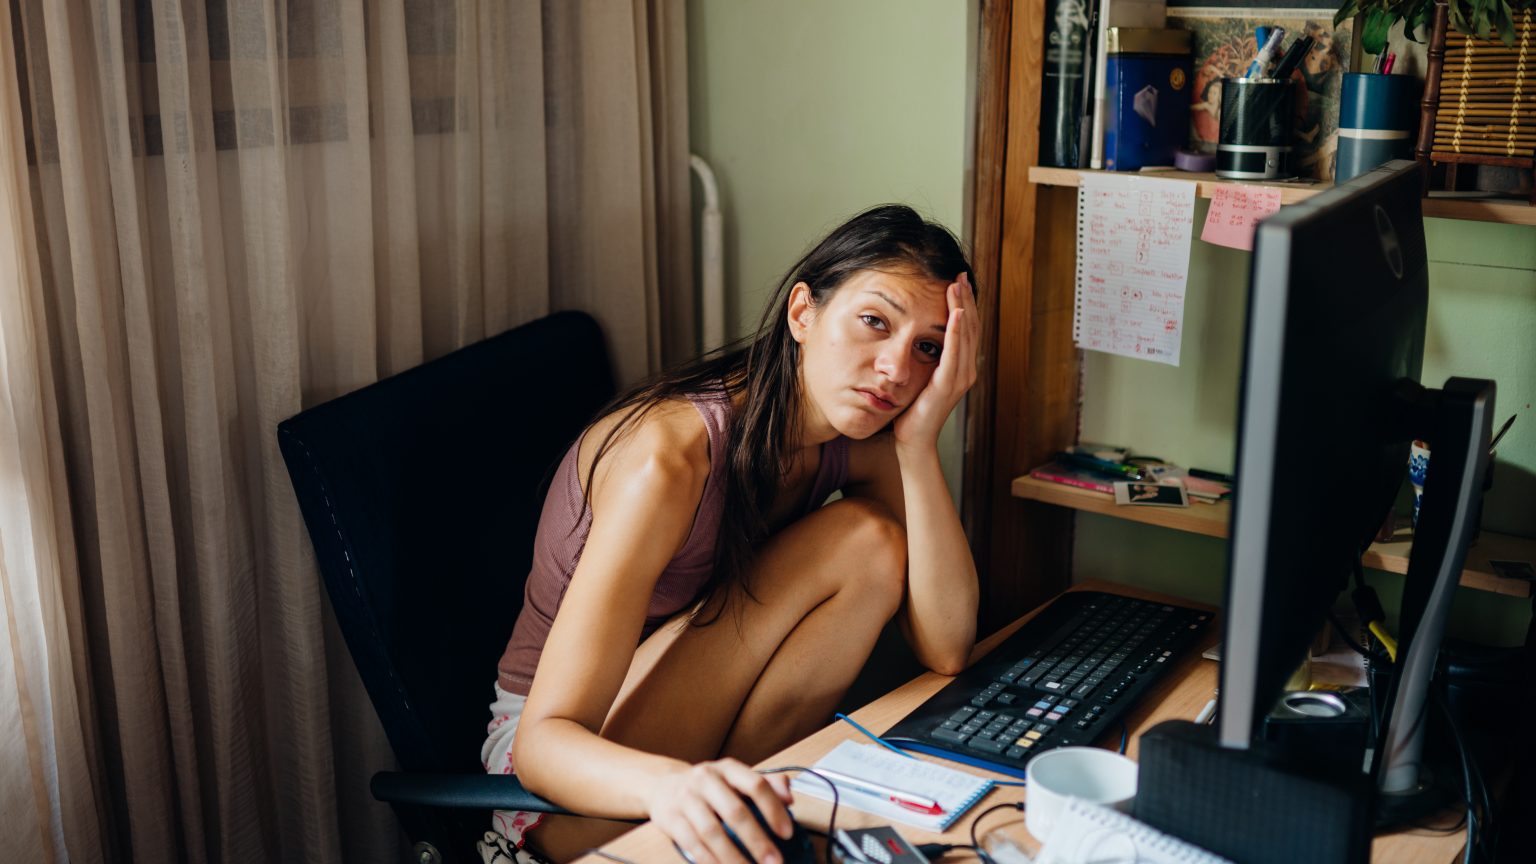 Stressed, depressed student working from her computer during the coronavirus pandemic.